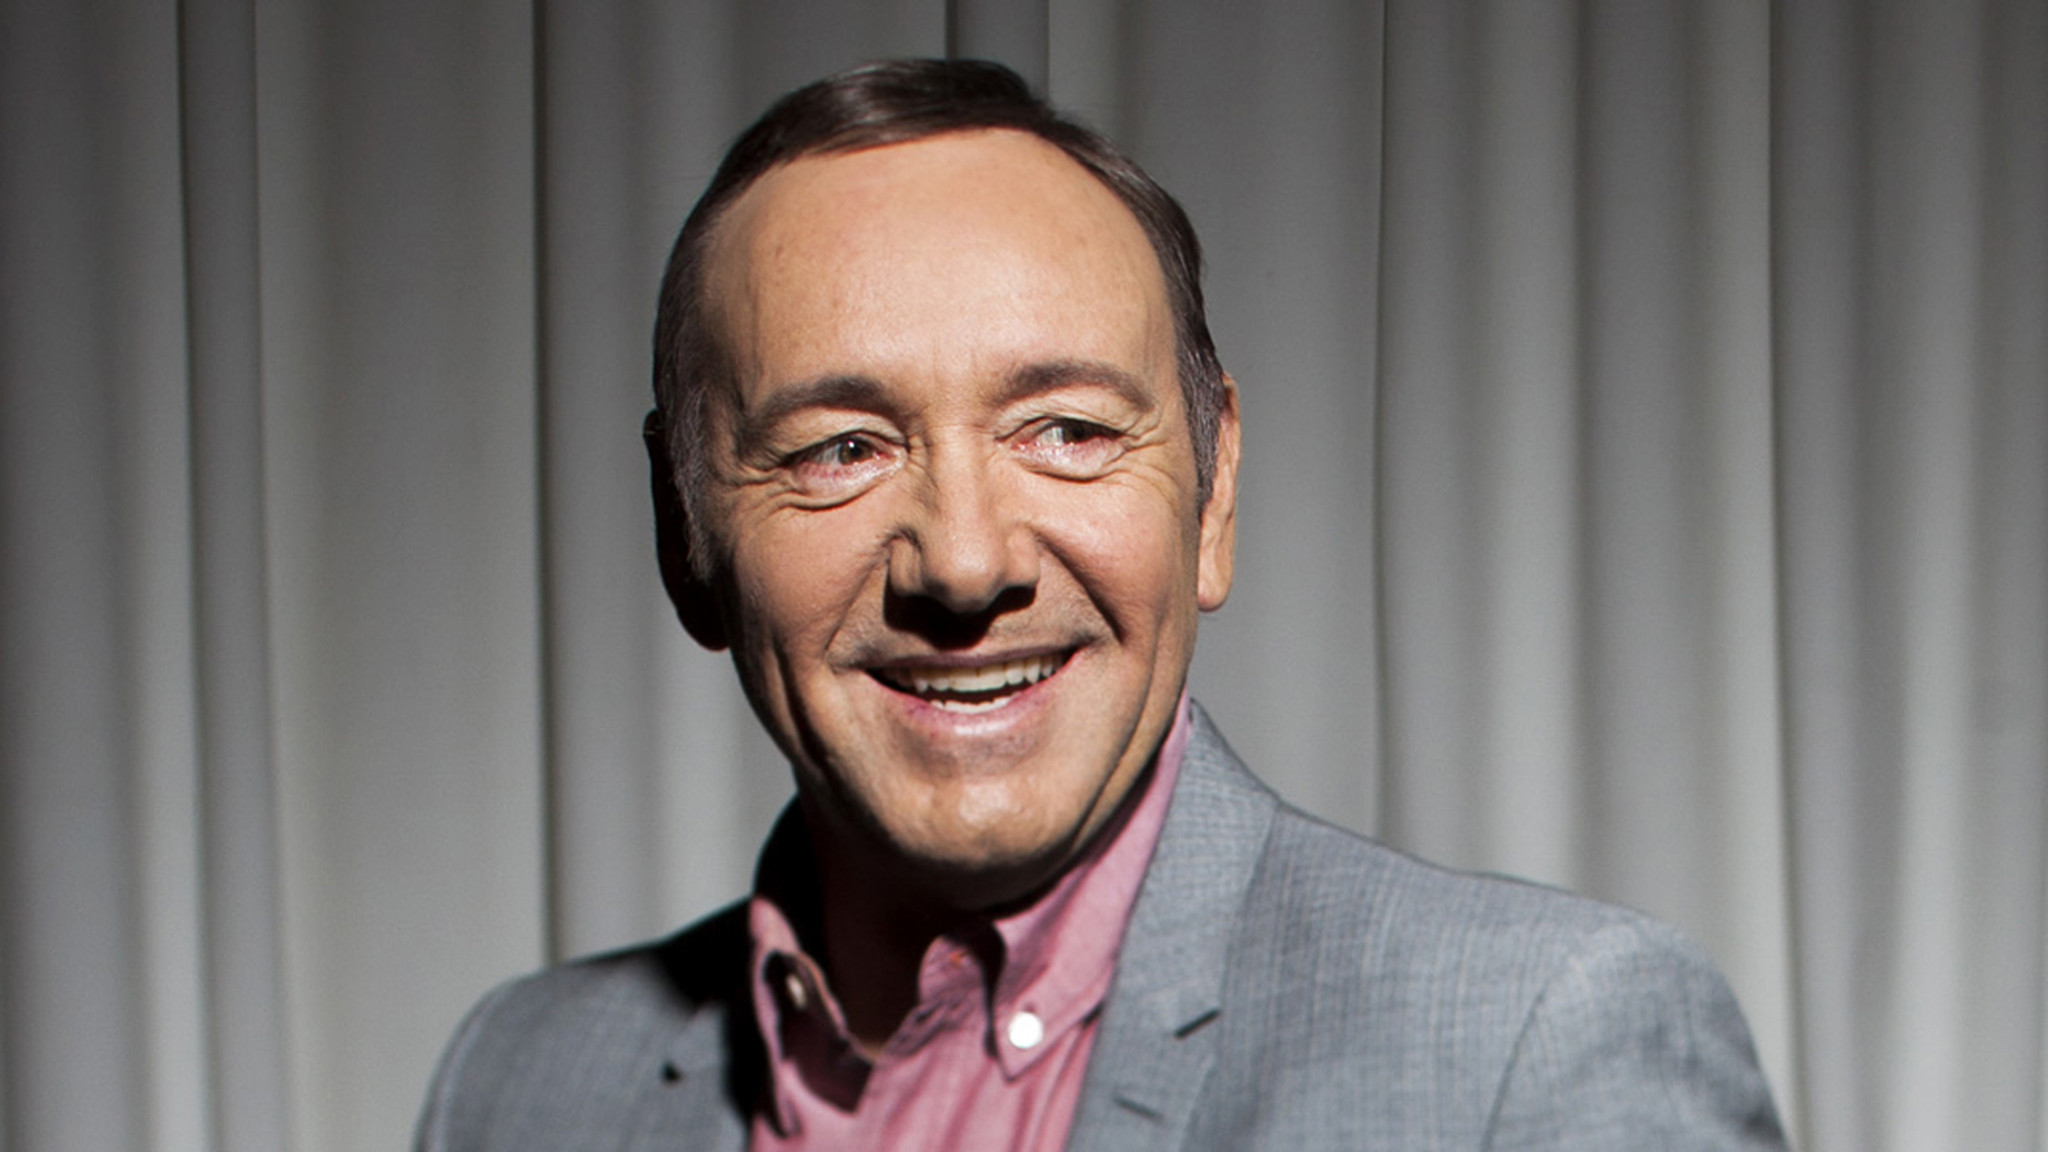 HQ Kevin Spacey Wallpapers | File 291.56Kb